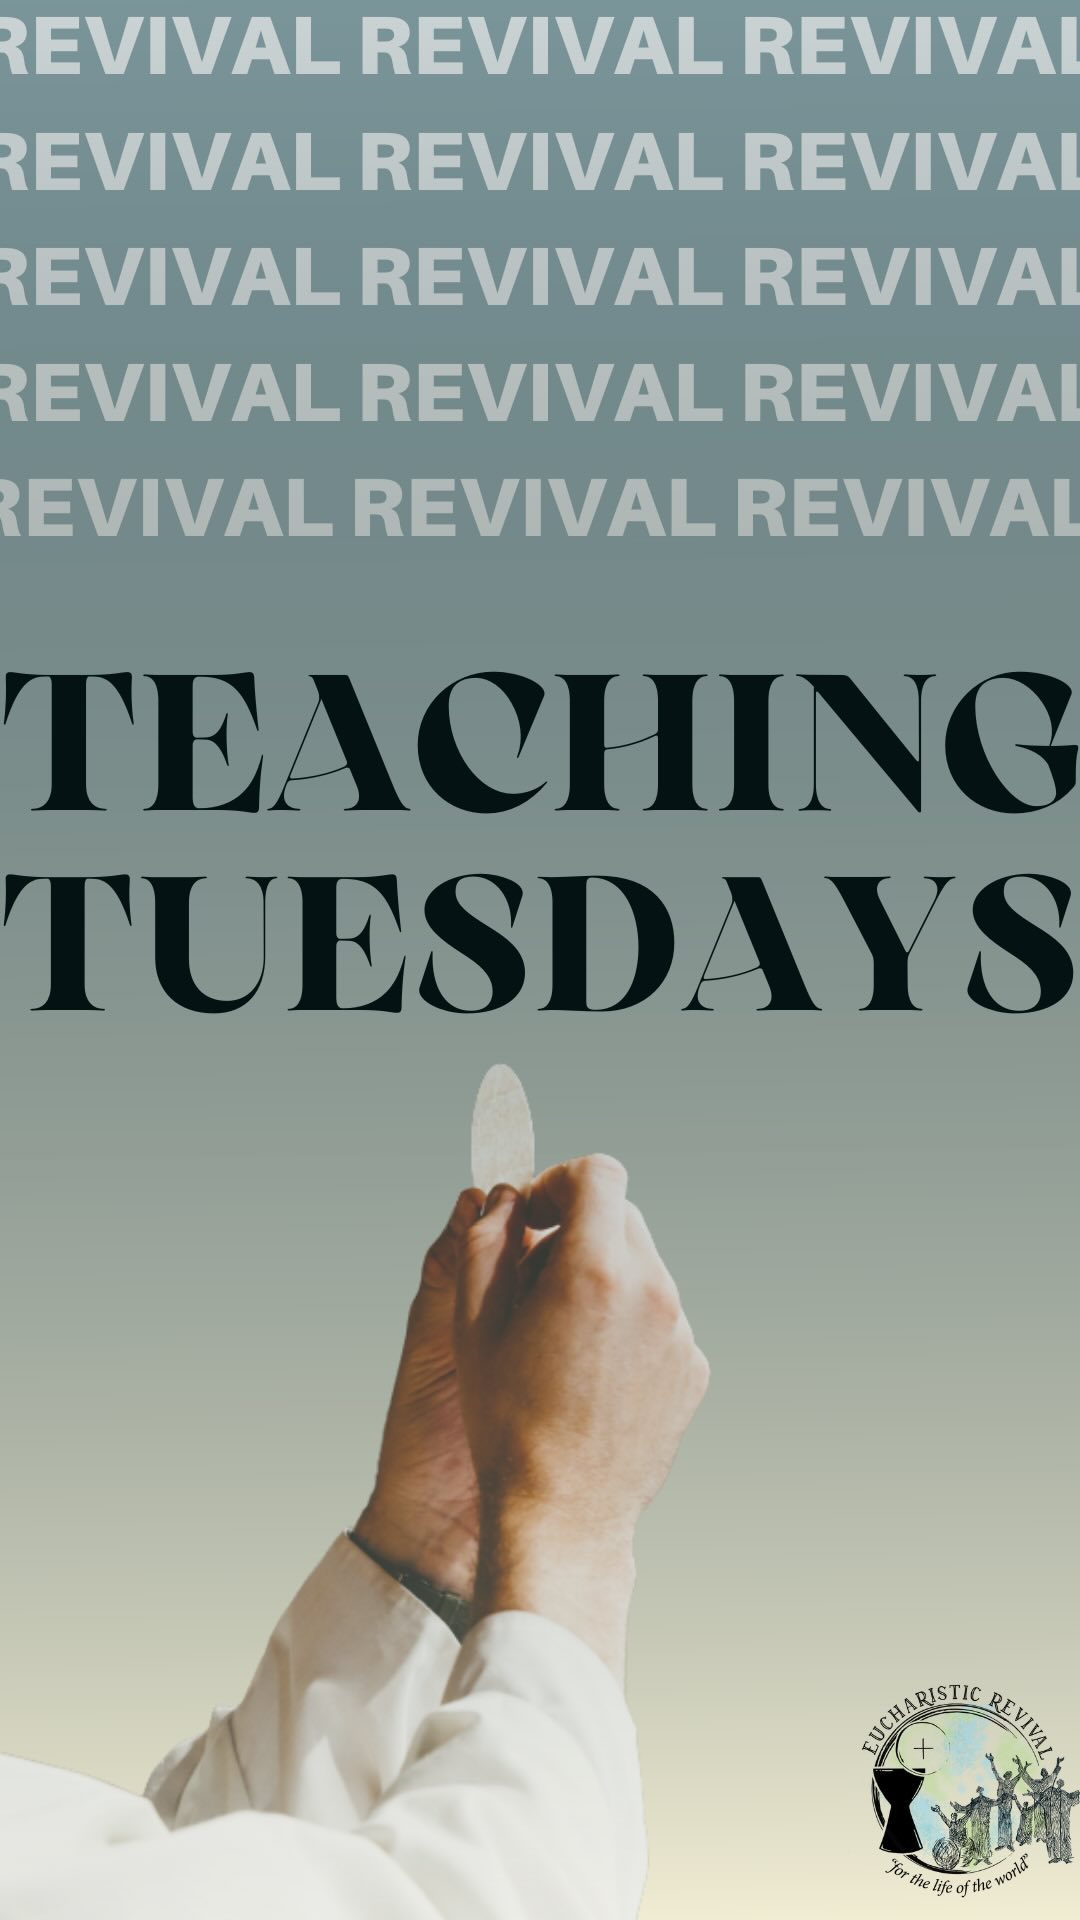 For week 7 of Teaching Tuesday, Anne explains what adoration is and why it’s important. 

Check back every Tuesday for more videos on the Eucharistic Revival made by Anne McCarney, education team lead.